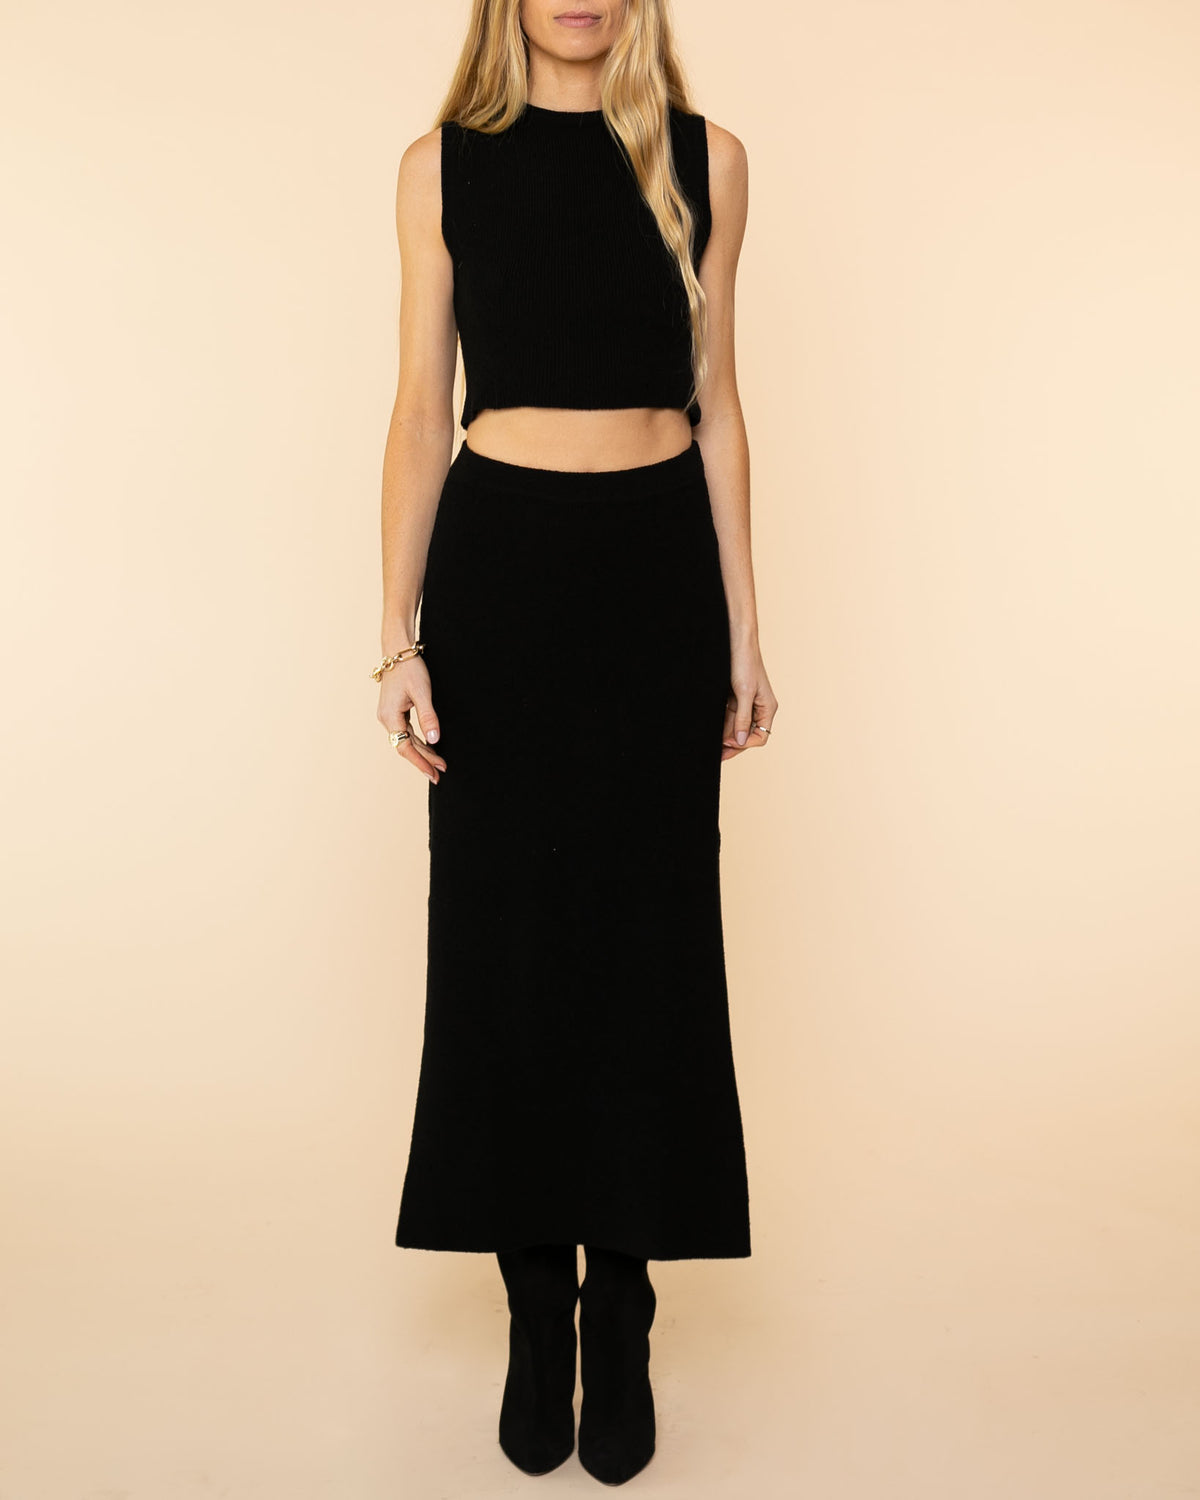 Chace Cropped Top | Black